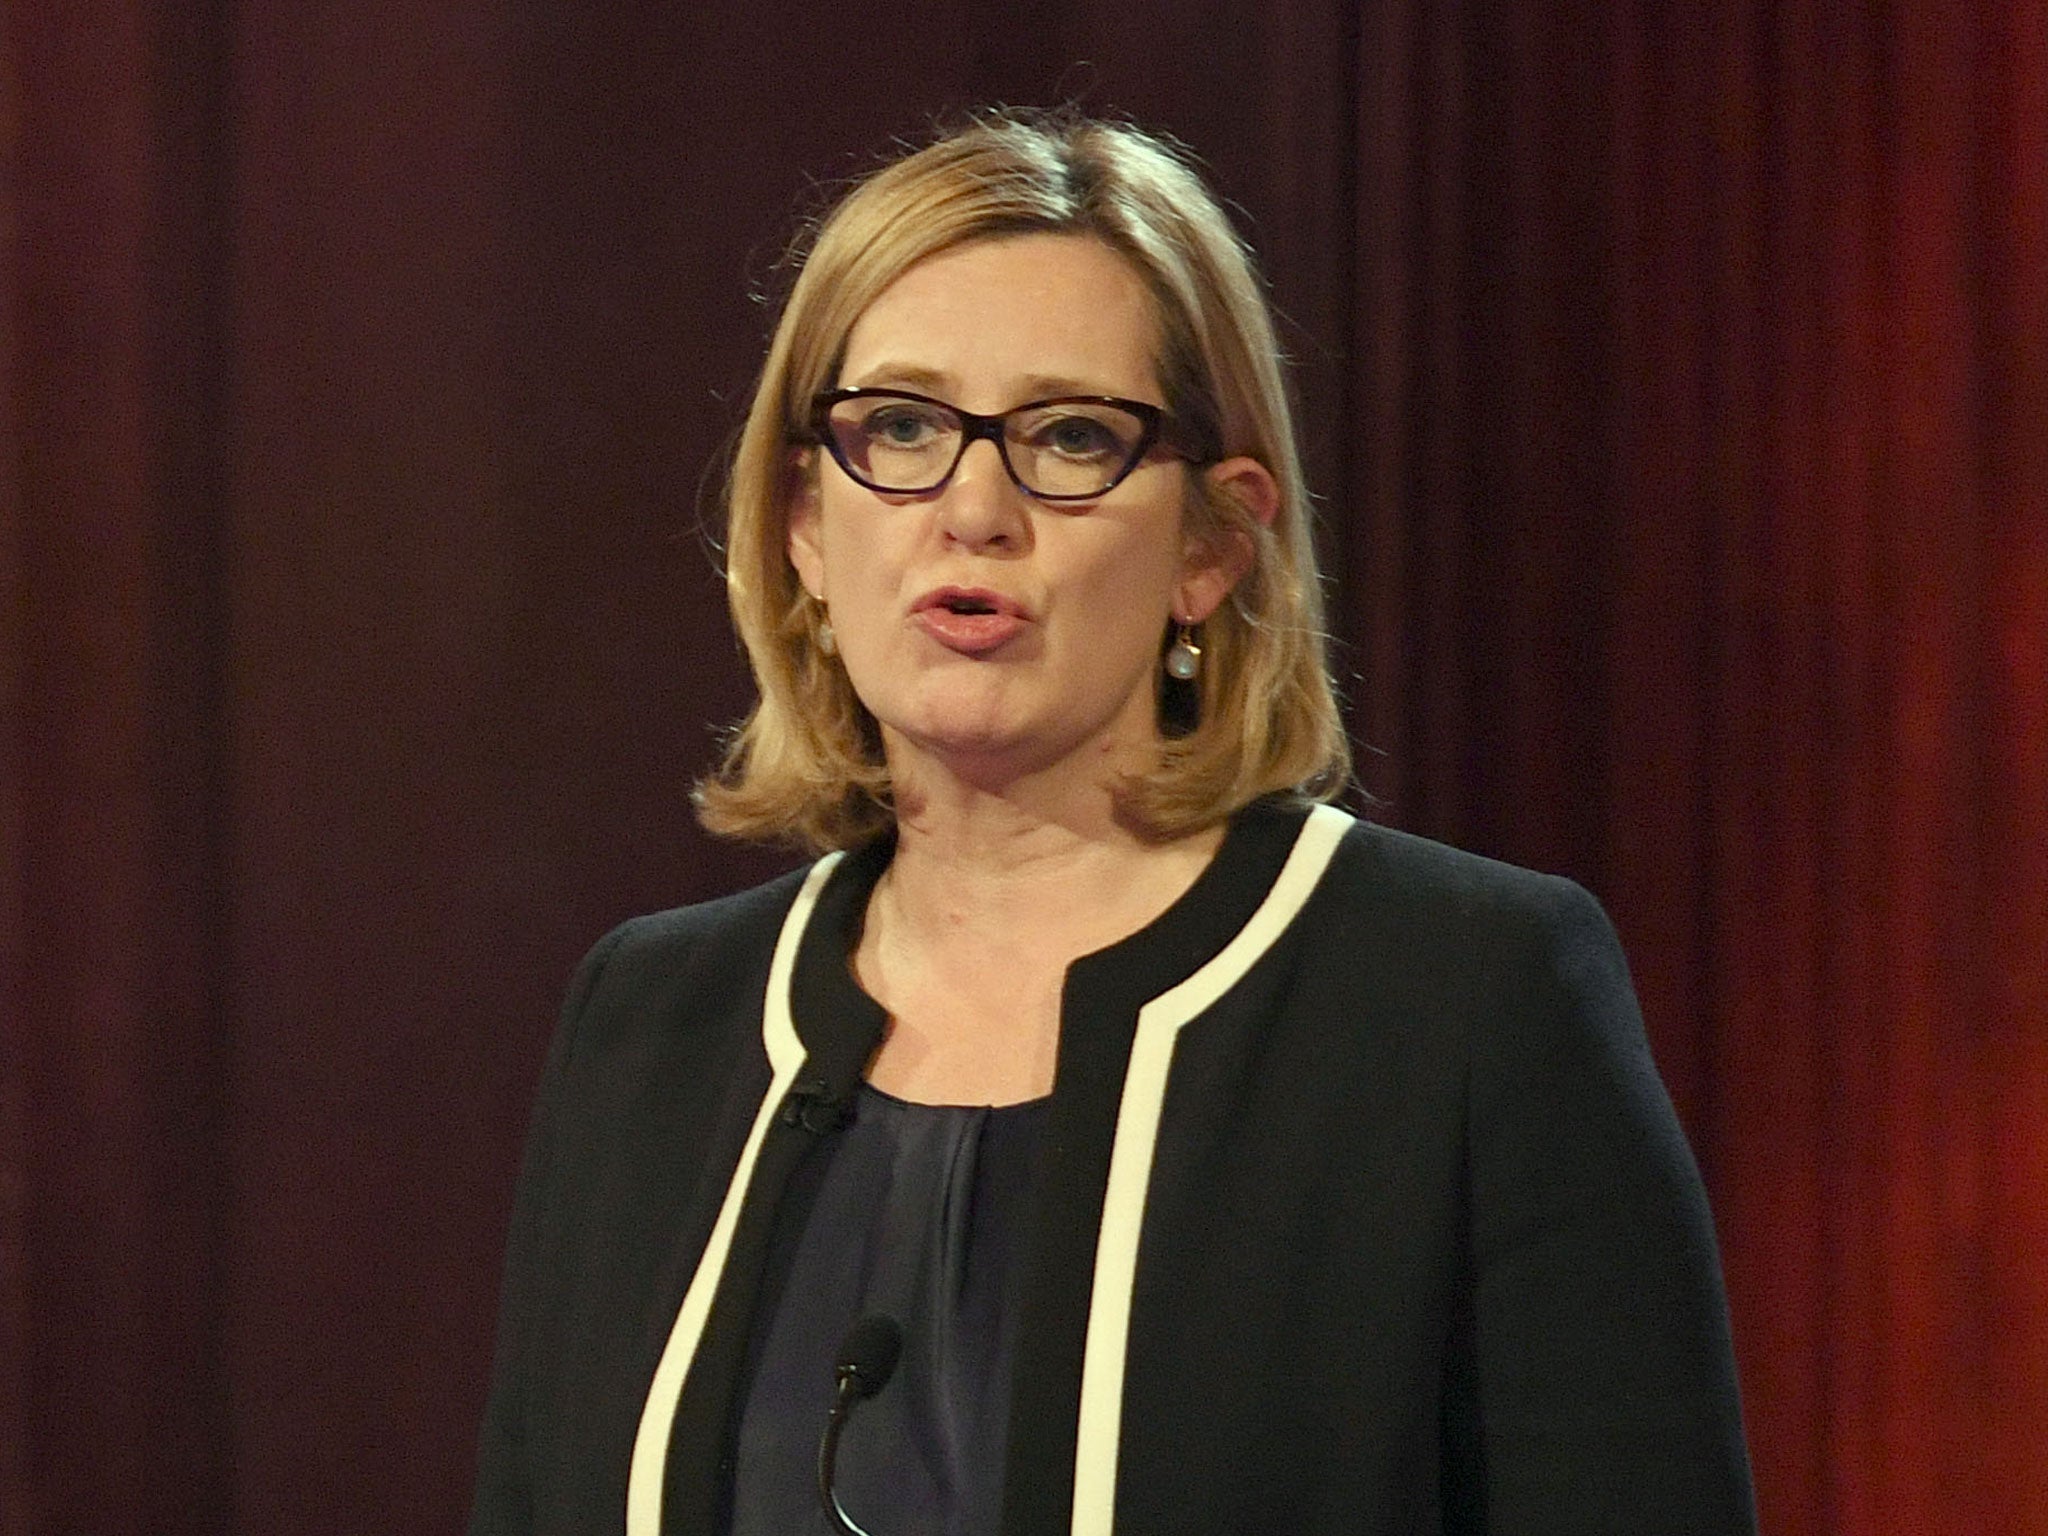 Home Secretary Amber Rudd claimed national security reasons and the personal information contained in the report meant it could not be released in full